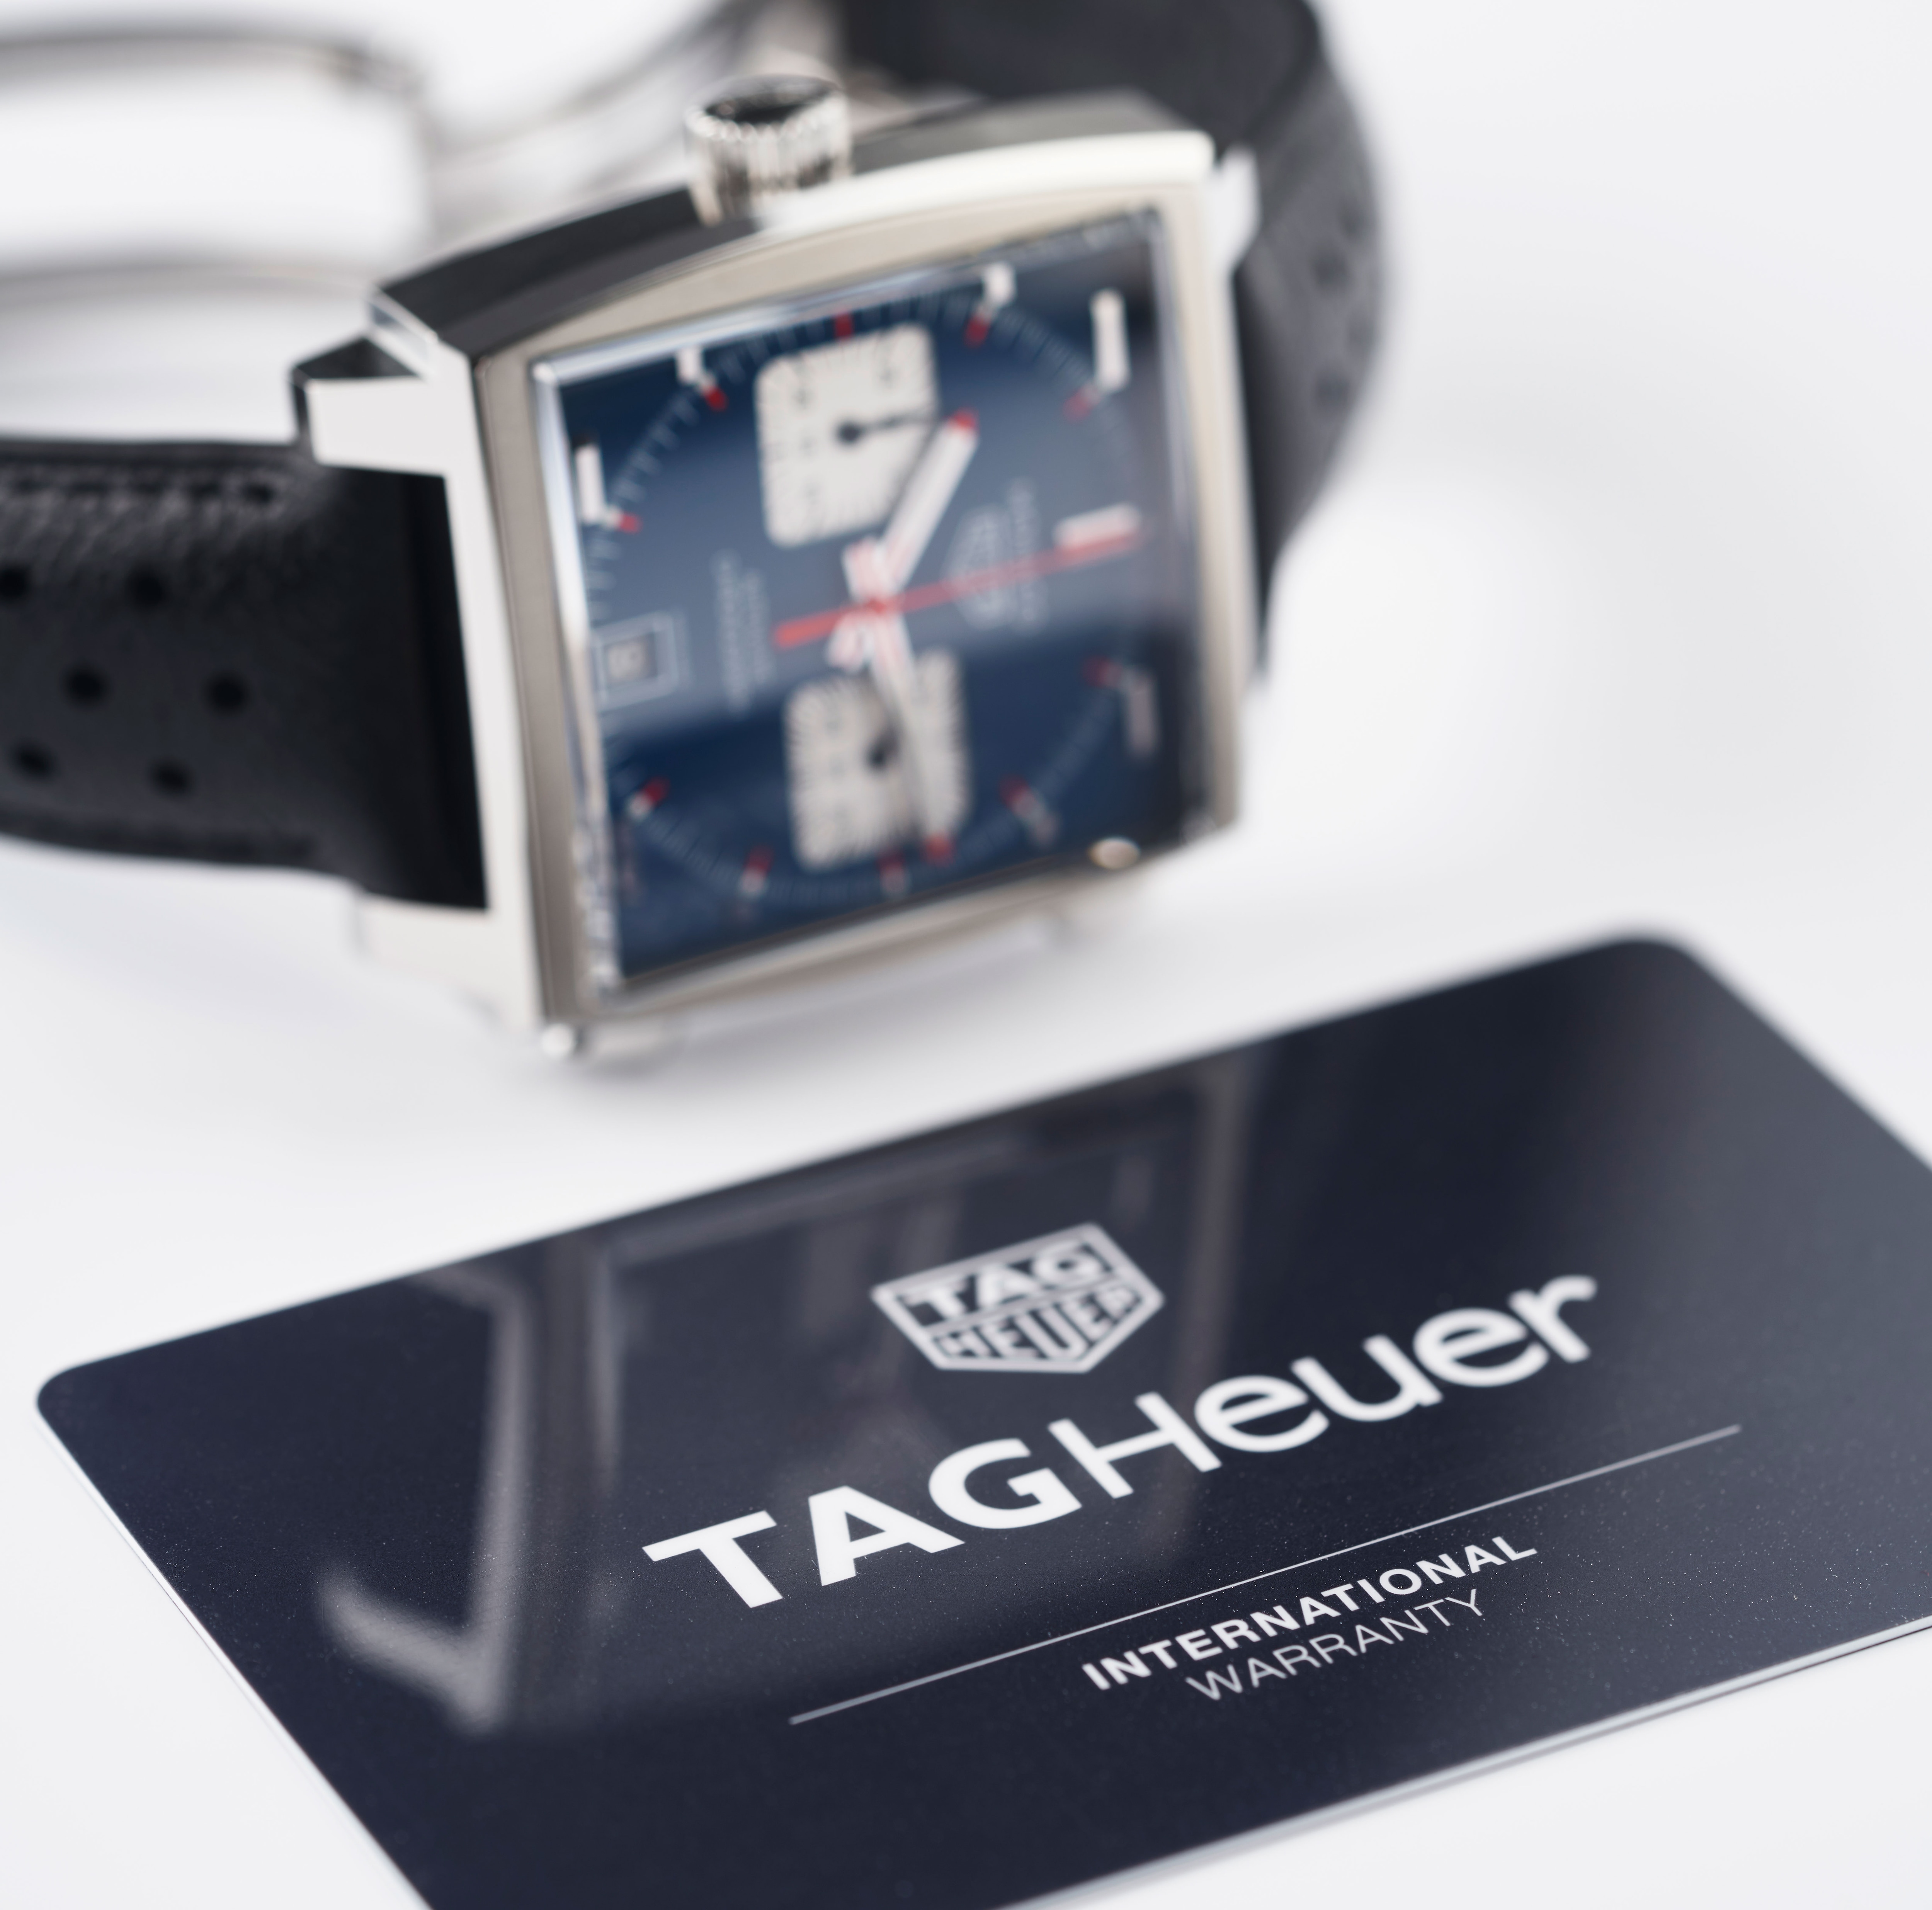 extend your tag heuer limited international warranty